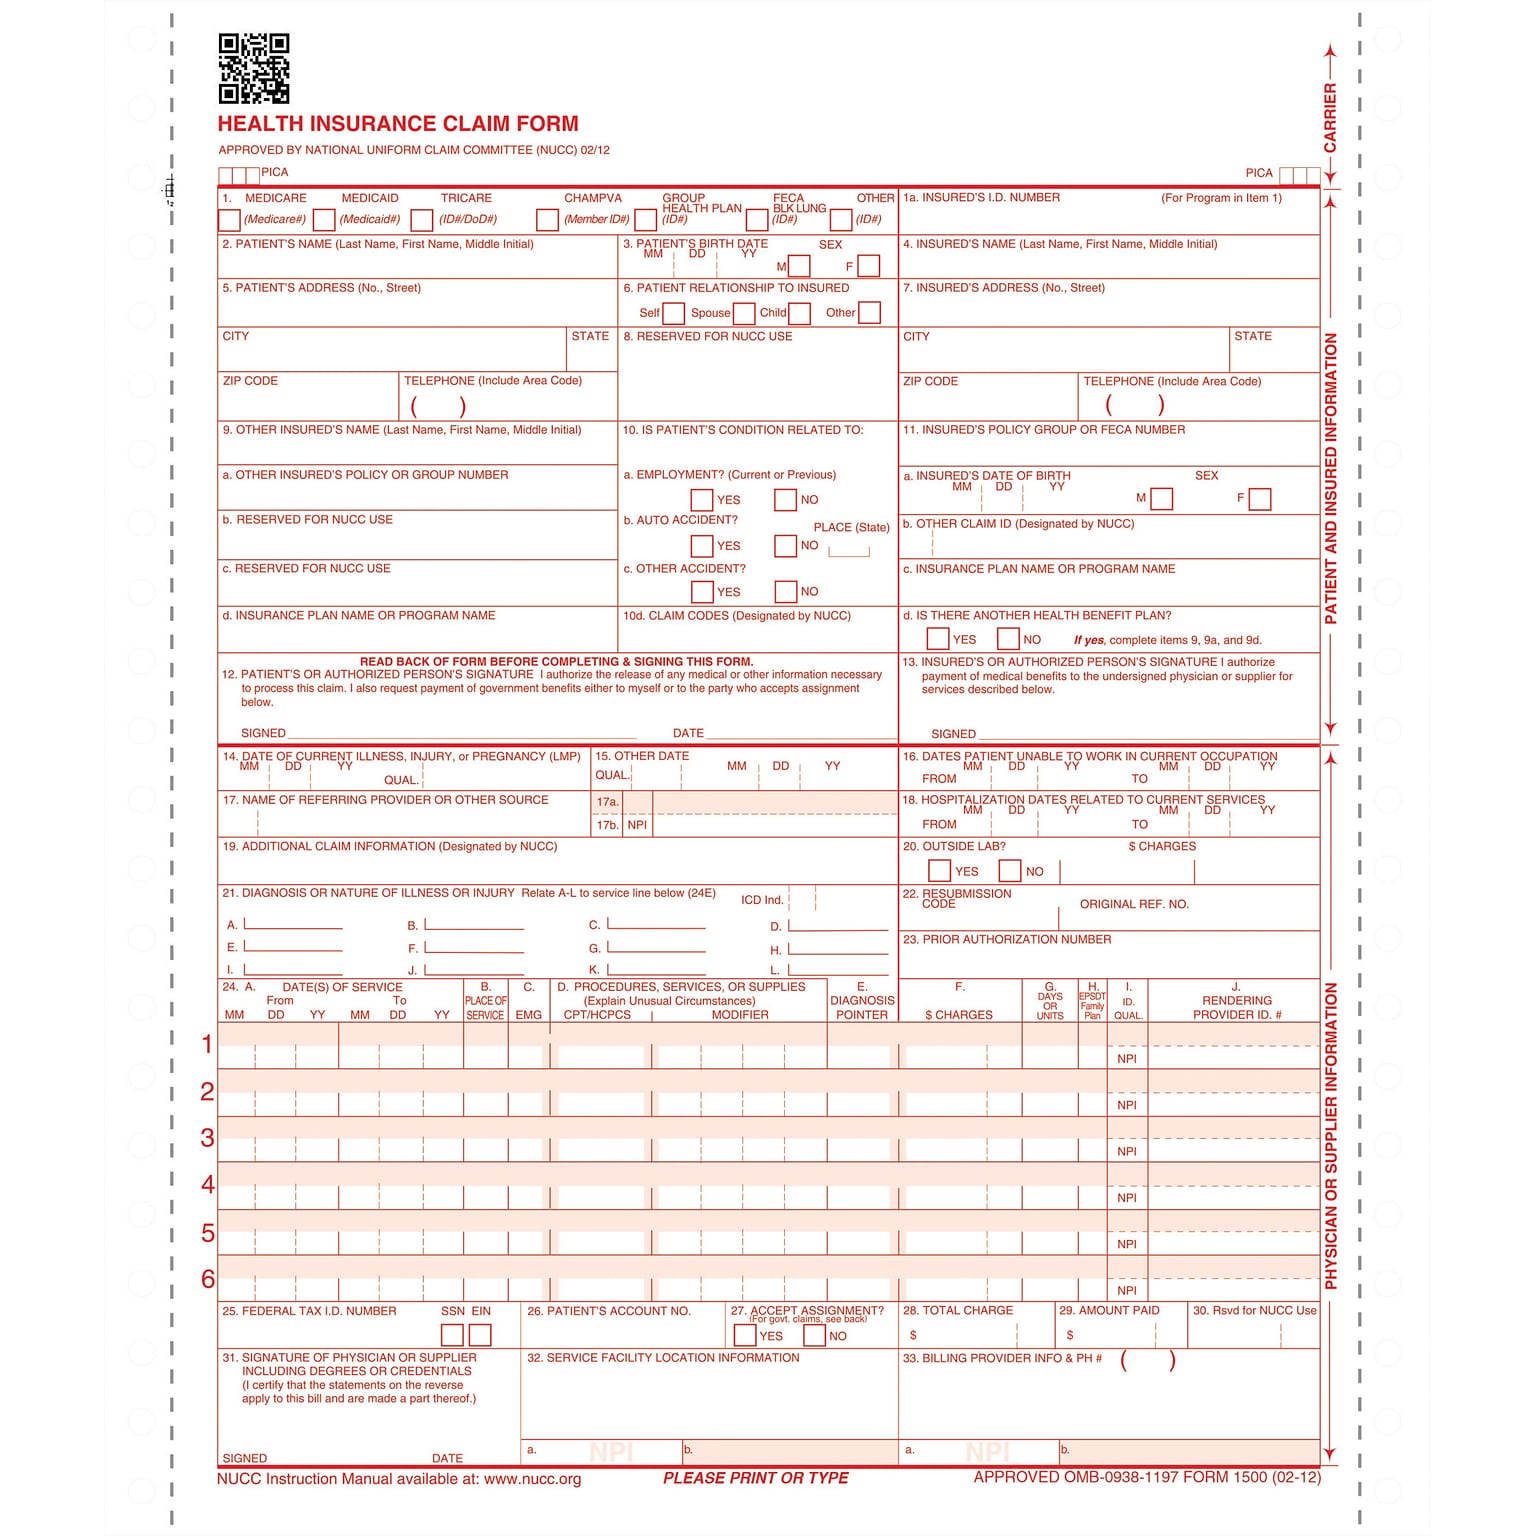 ComplyRight™ CMS-1500 Health Insurance Claim Form (02/12), 2-Part Continuous, White/Yellow, 1,000/Box